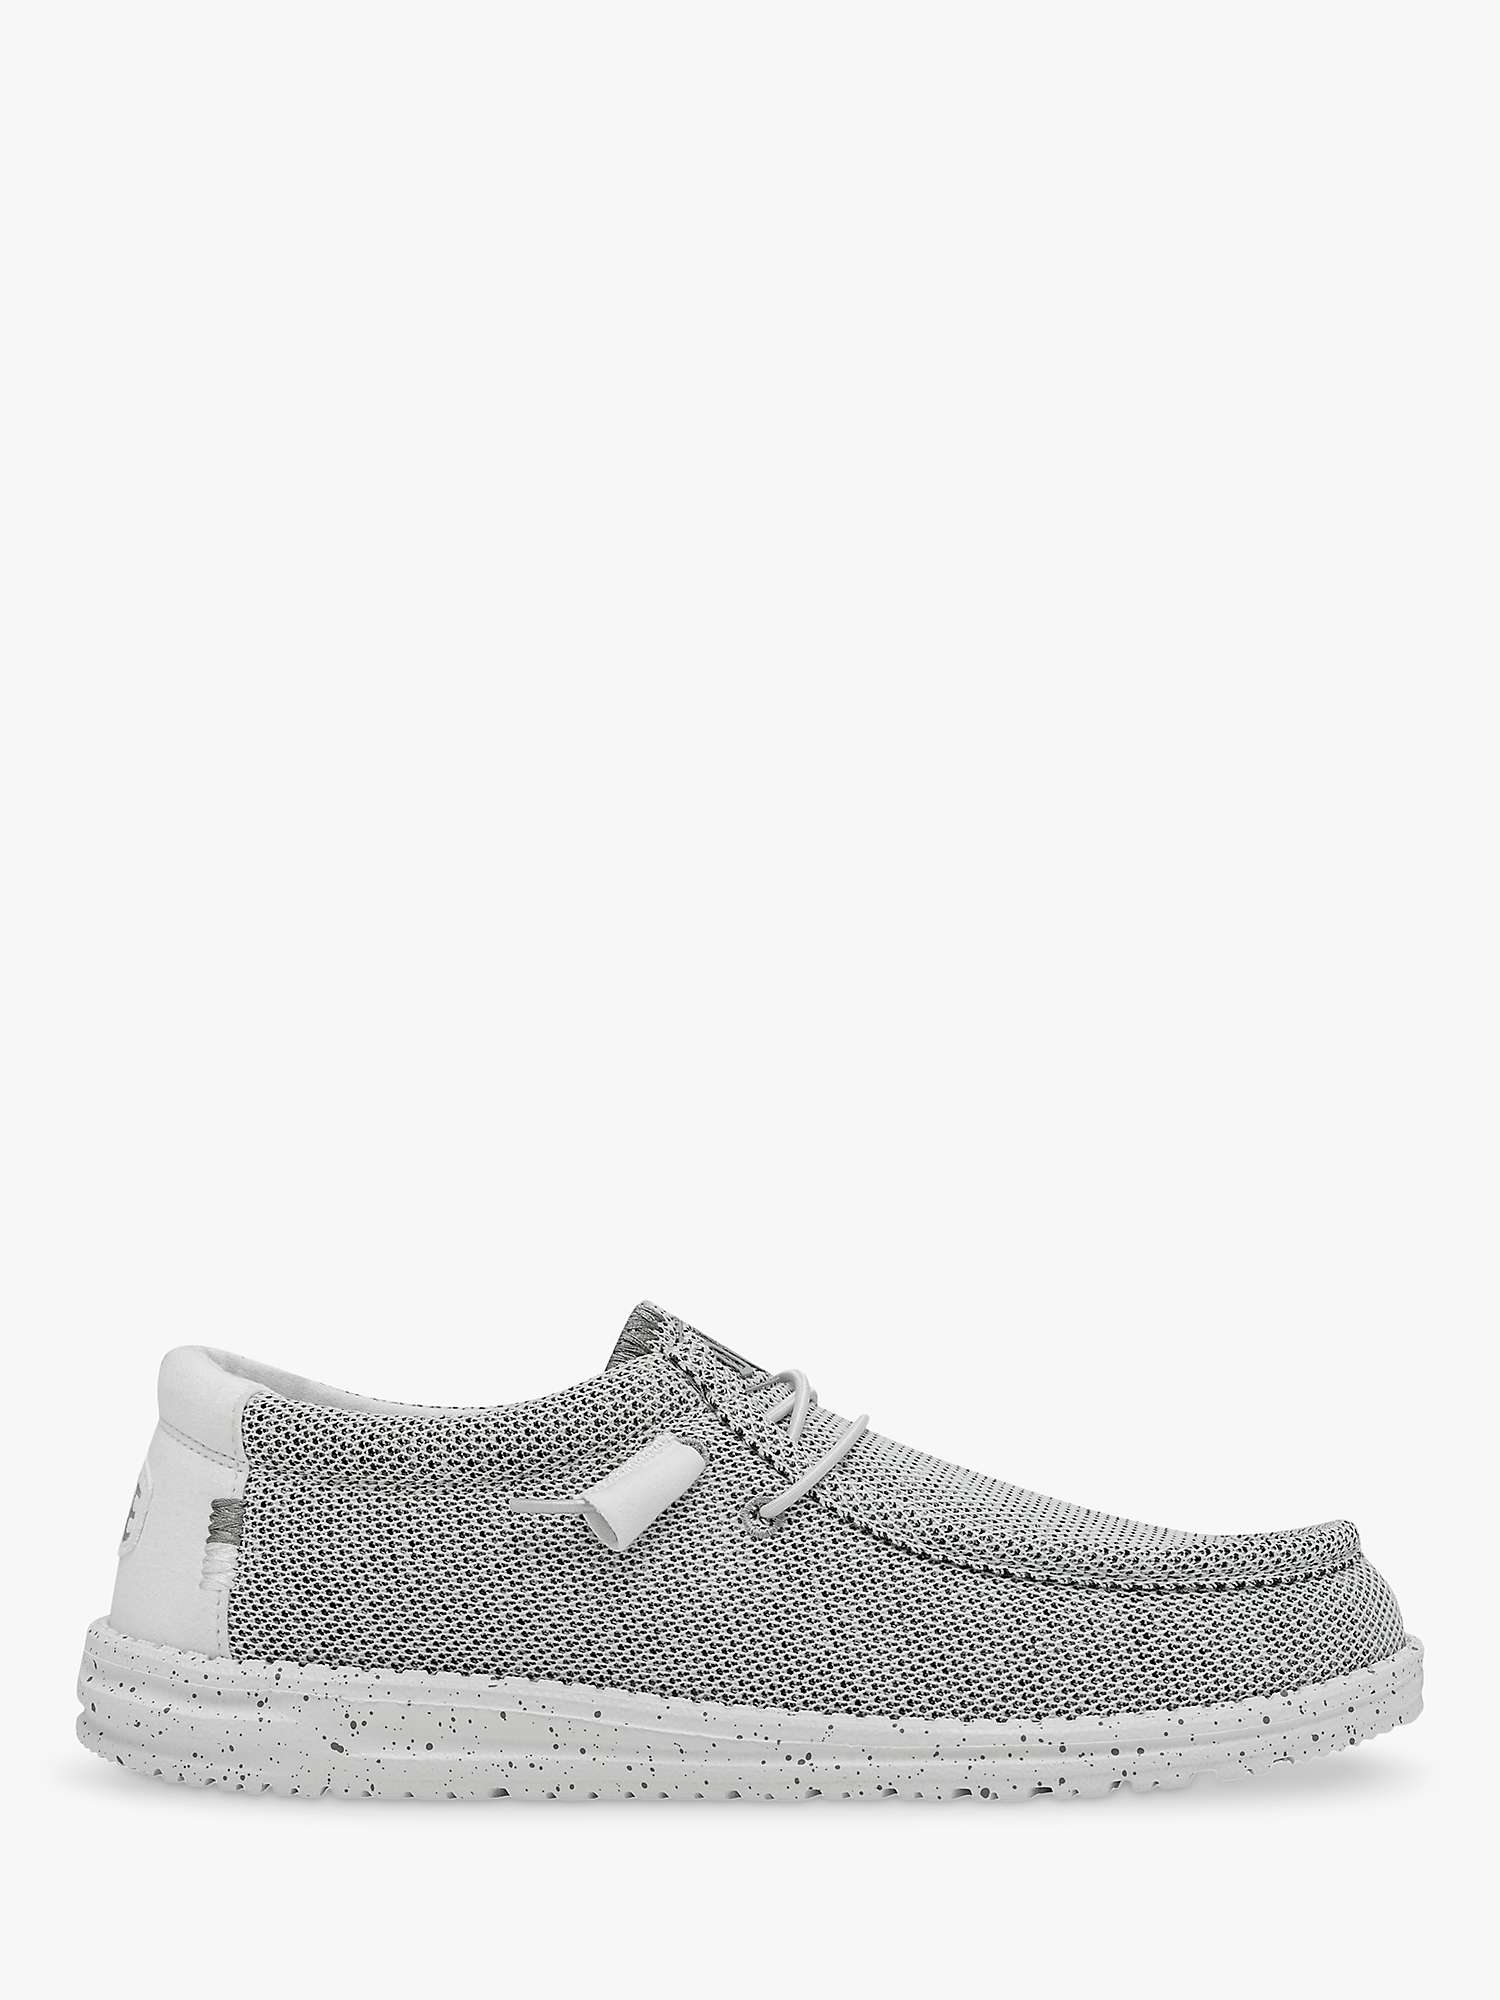 Buy Hey Dude Wally Sox Slip On Shoes Online at johnlewis.com